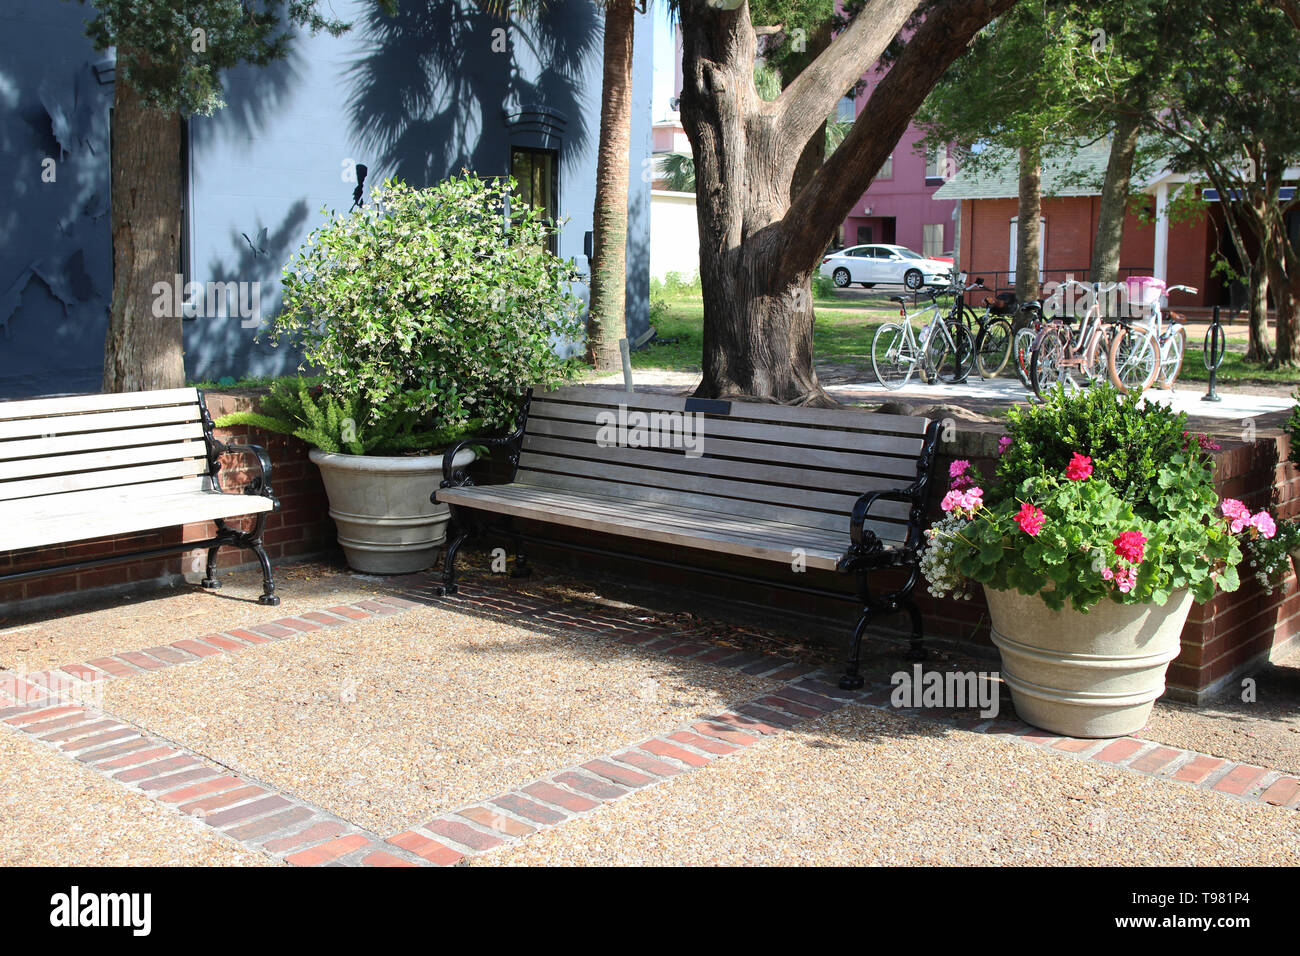 Wooden benches with flowers in the Amelia Island Historic District (Old Town), Fernandina Beach, Florida, USA Stock Photo